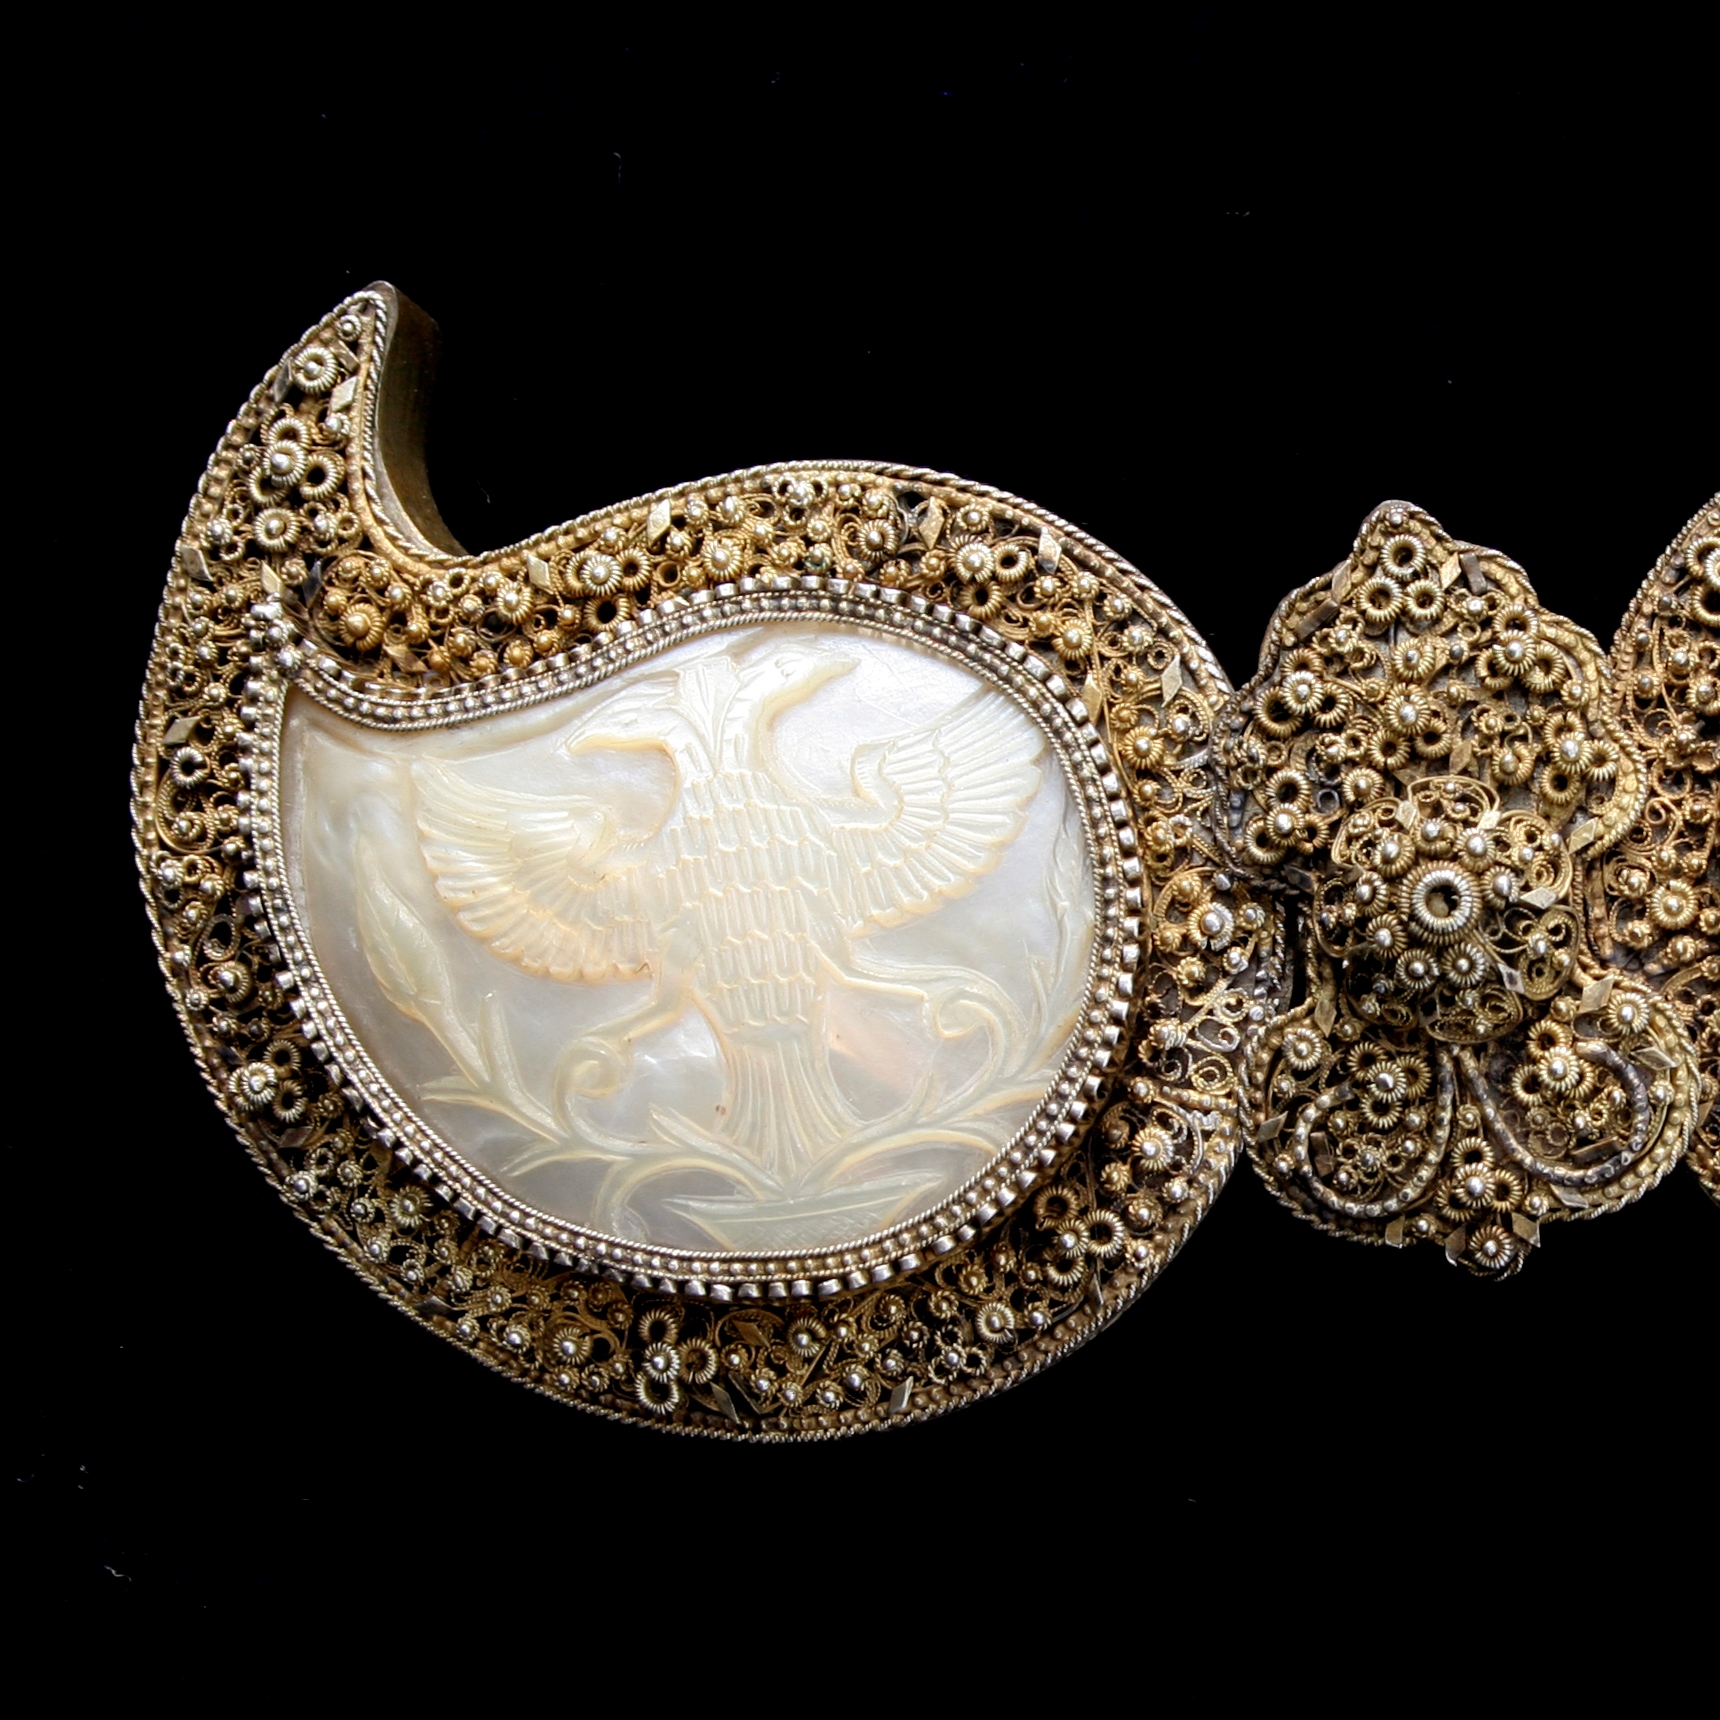 Buckles, richly decorated and with a relief image of a two-headed bird.